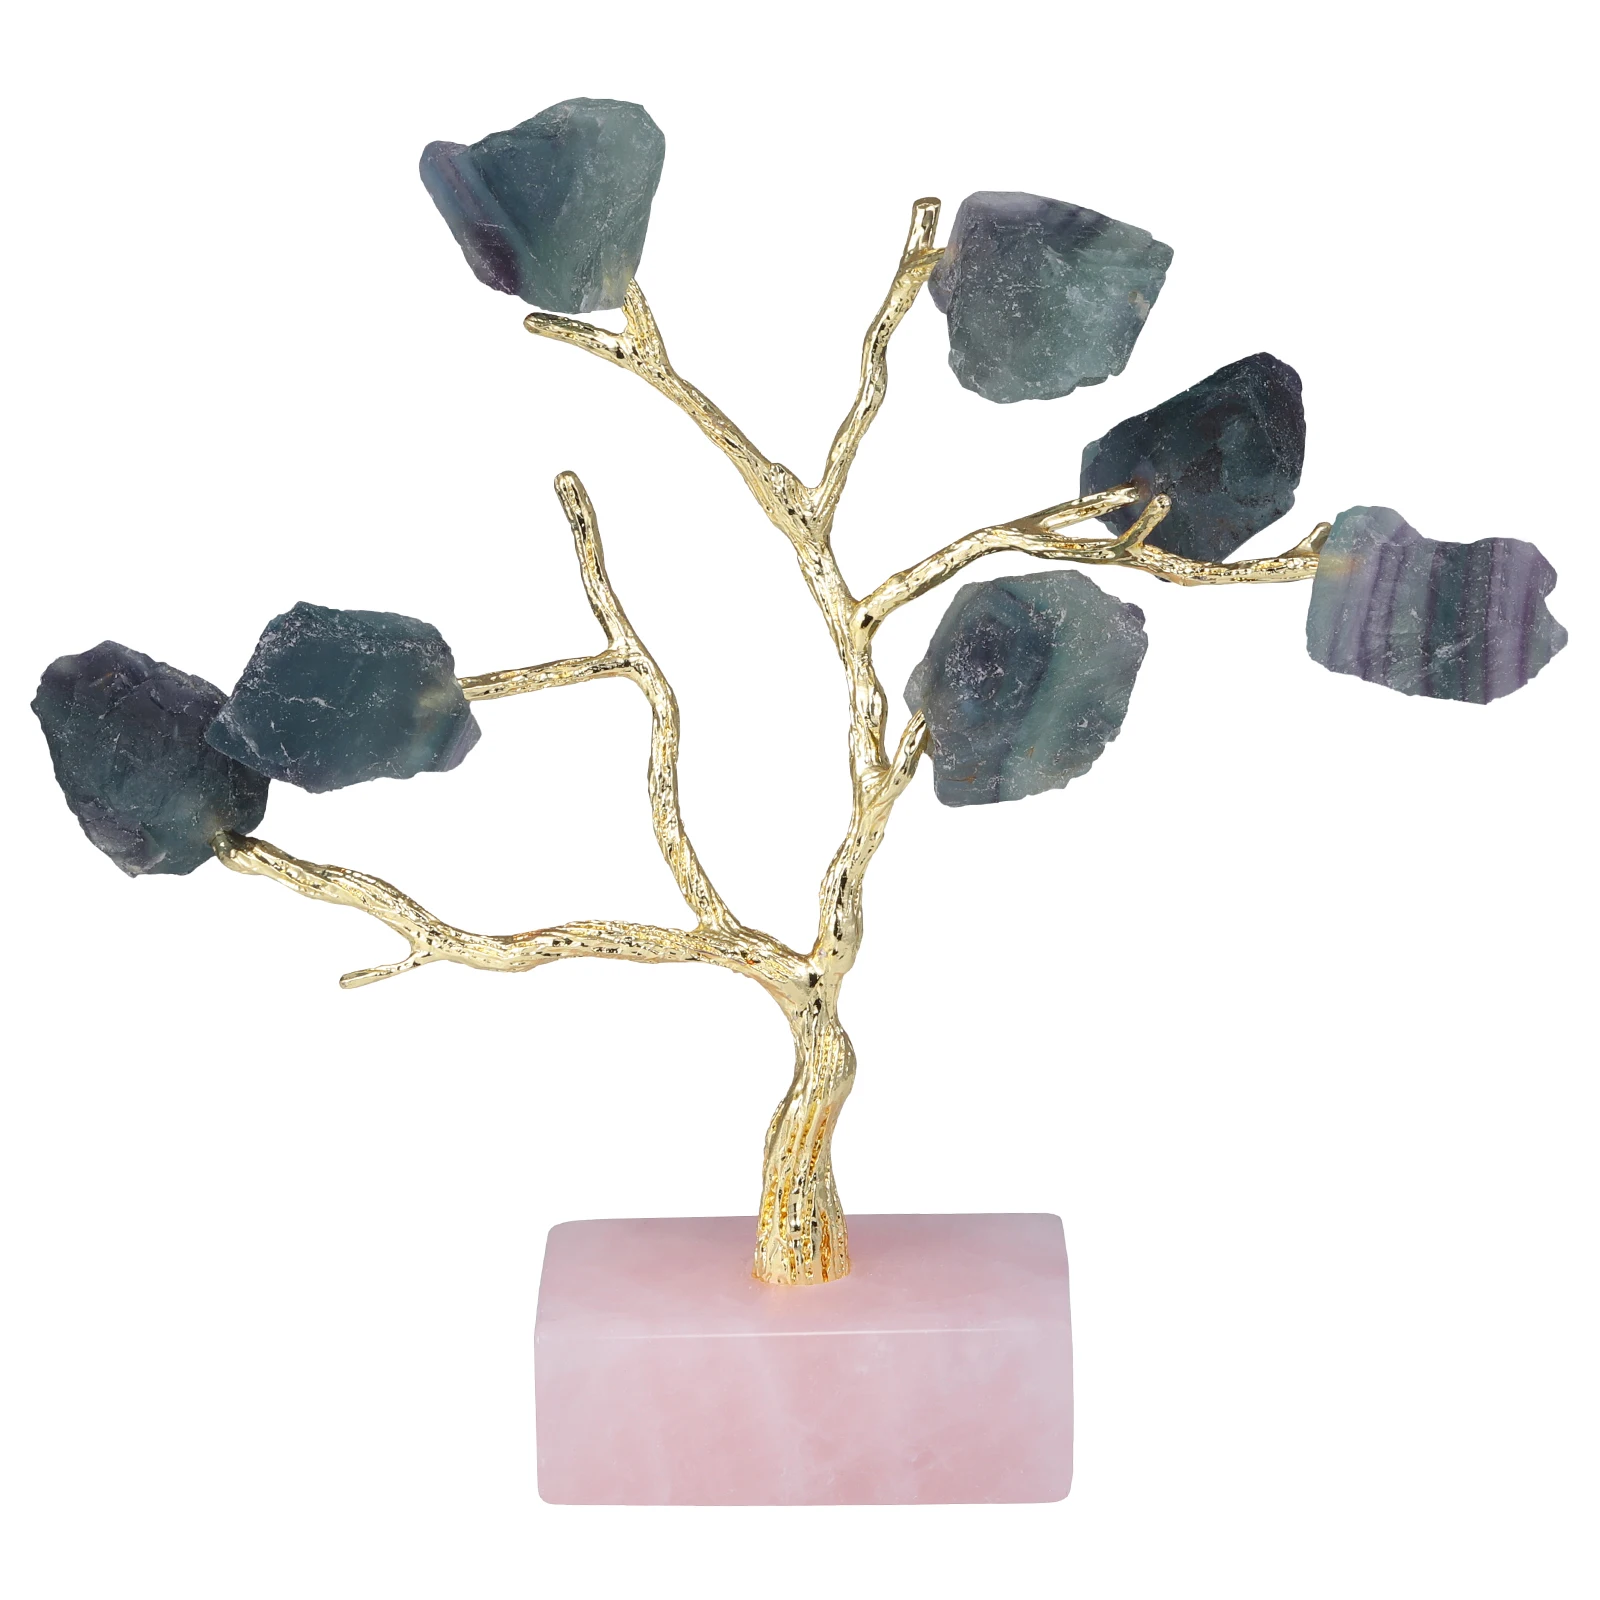 Natural Rough Crystal Stone Tree With Rose Quartz Base Healing Gemstone Golden Tree For Jewelry Organizer Home Table Decoration natural epidote crystal quartz healing rough crystal quartz specimen ornament for home decoration 10 99g